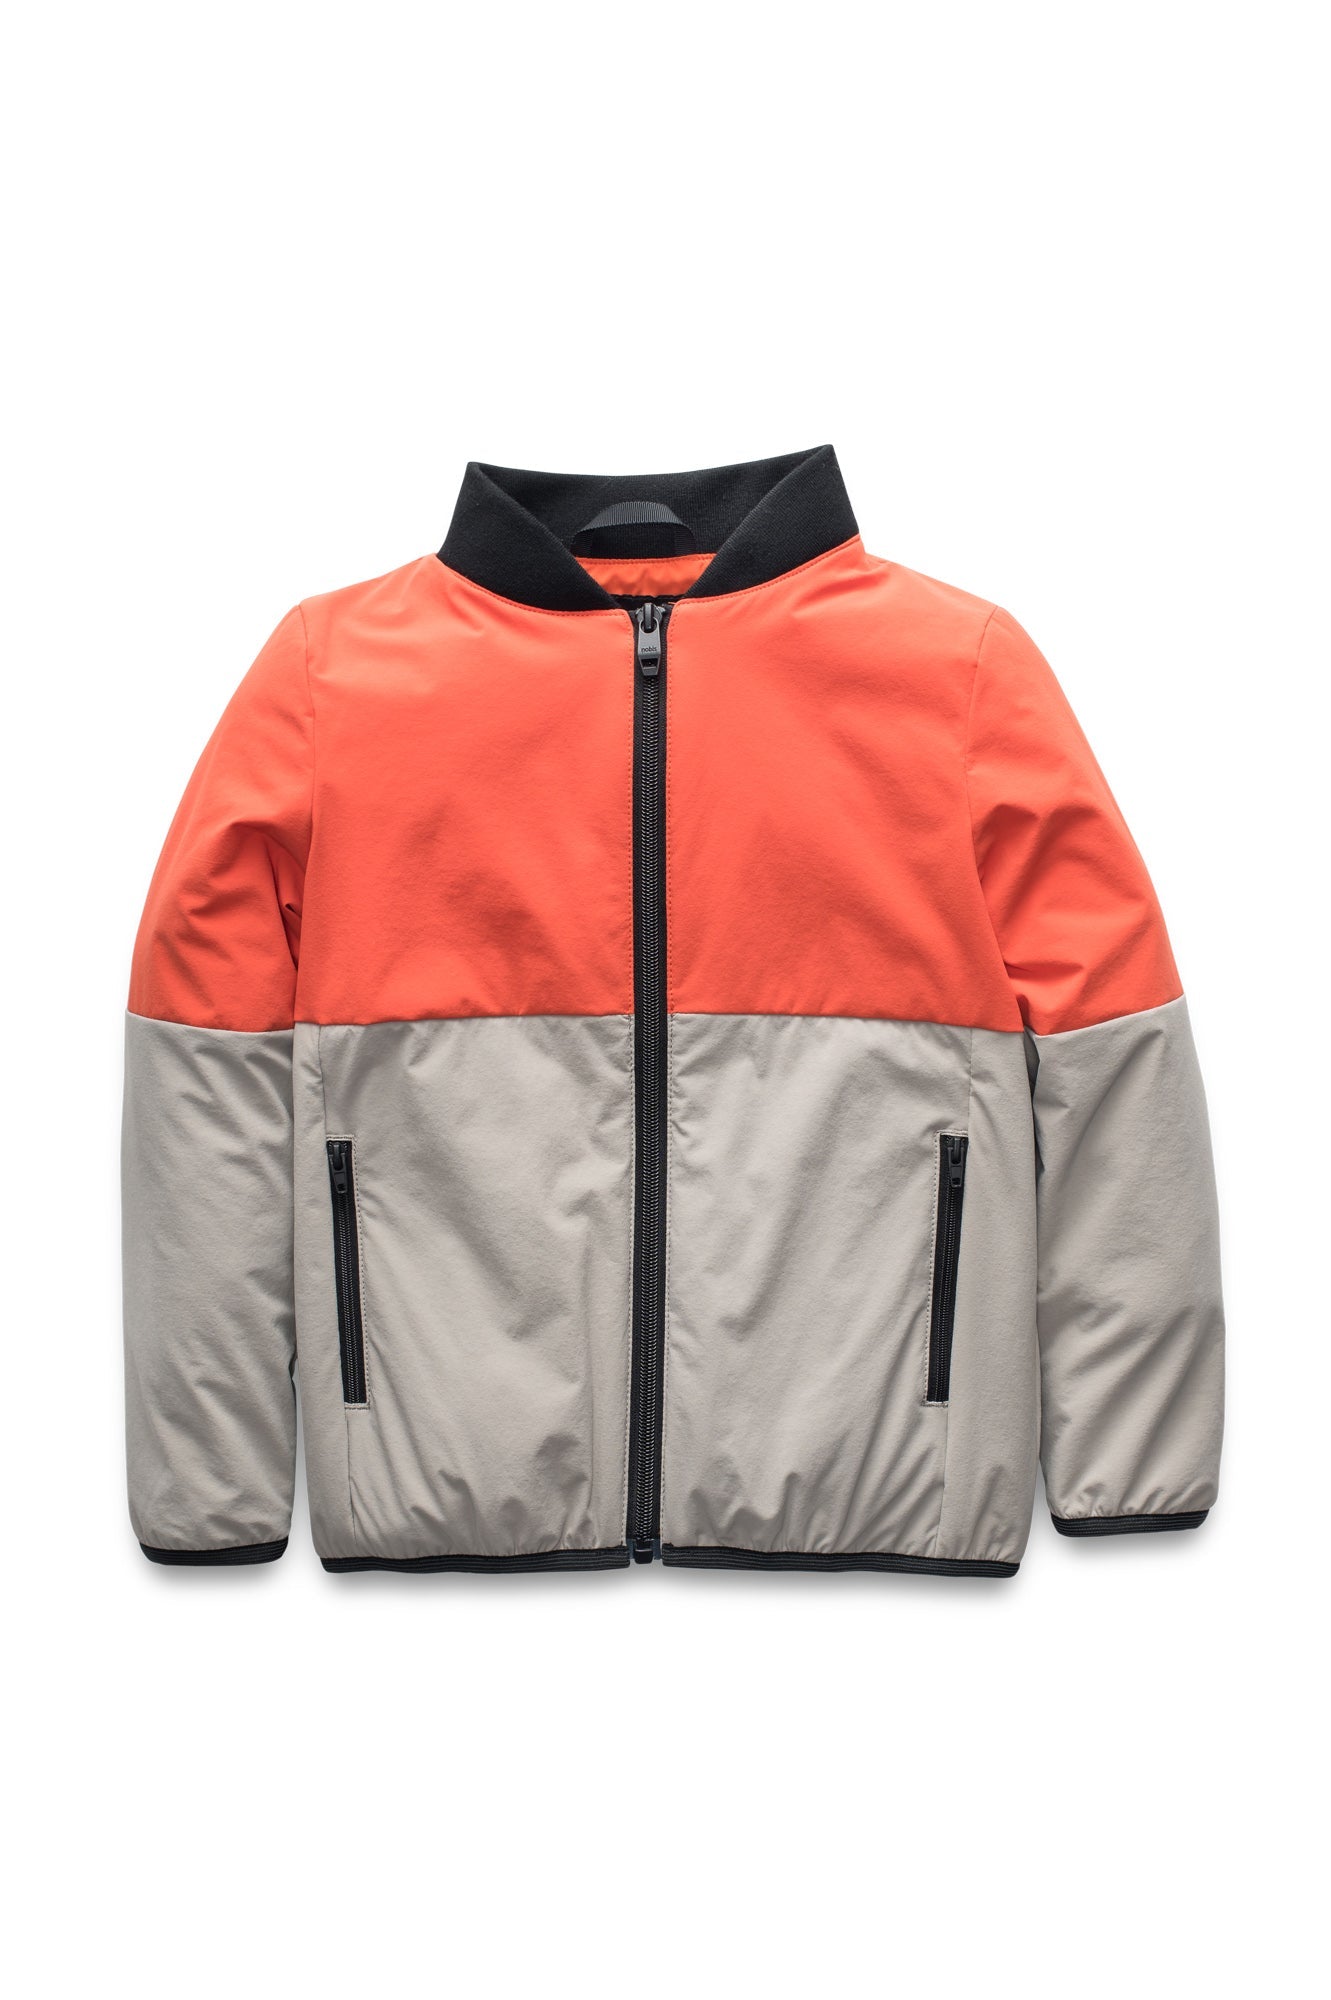 Little Ursa Kids Mid Layer Jacket in hip length, Primaloft Gold Insulation Active, ribbed collar, and two-way front zipper, in Terracotta